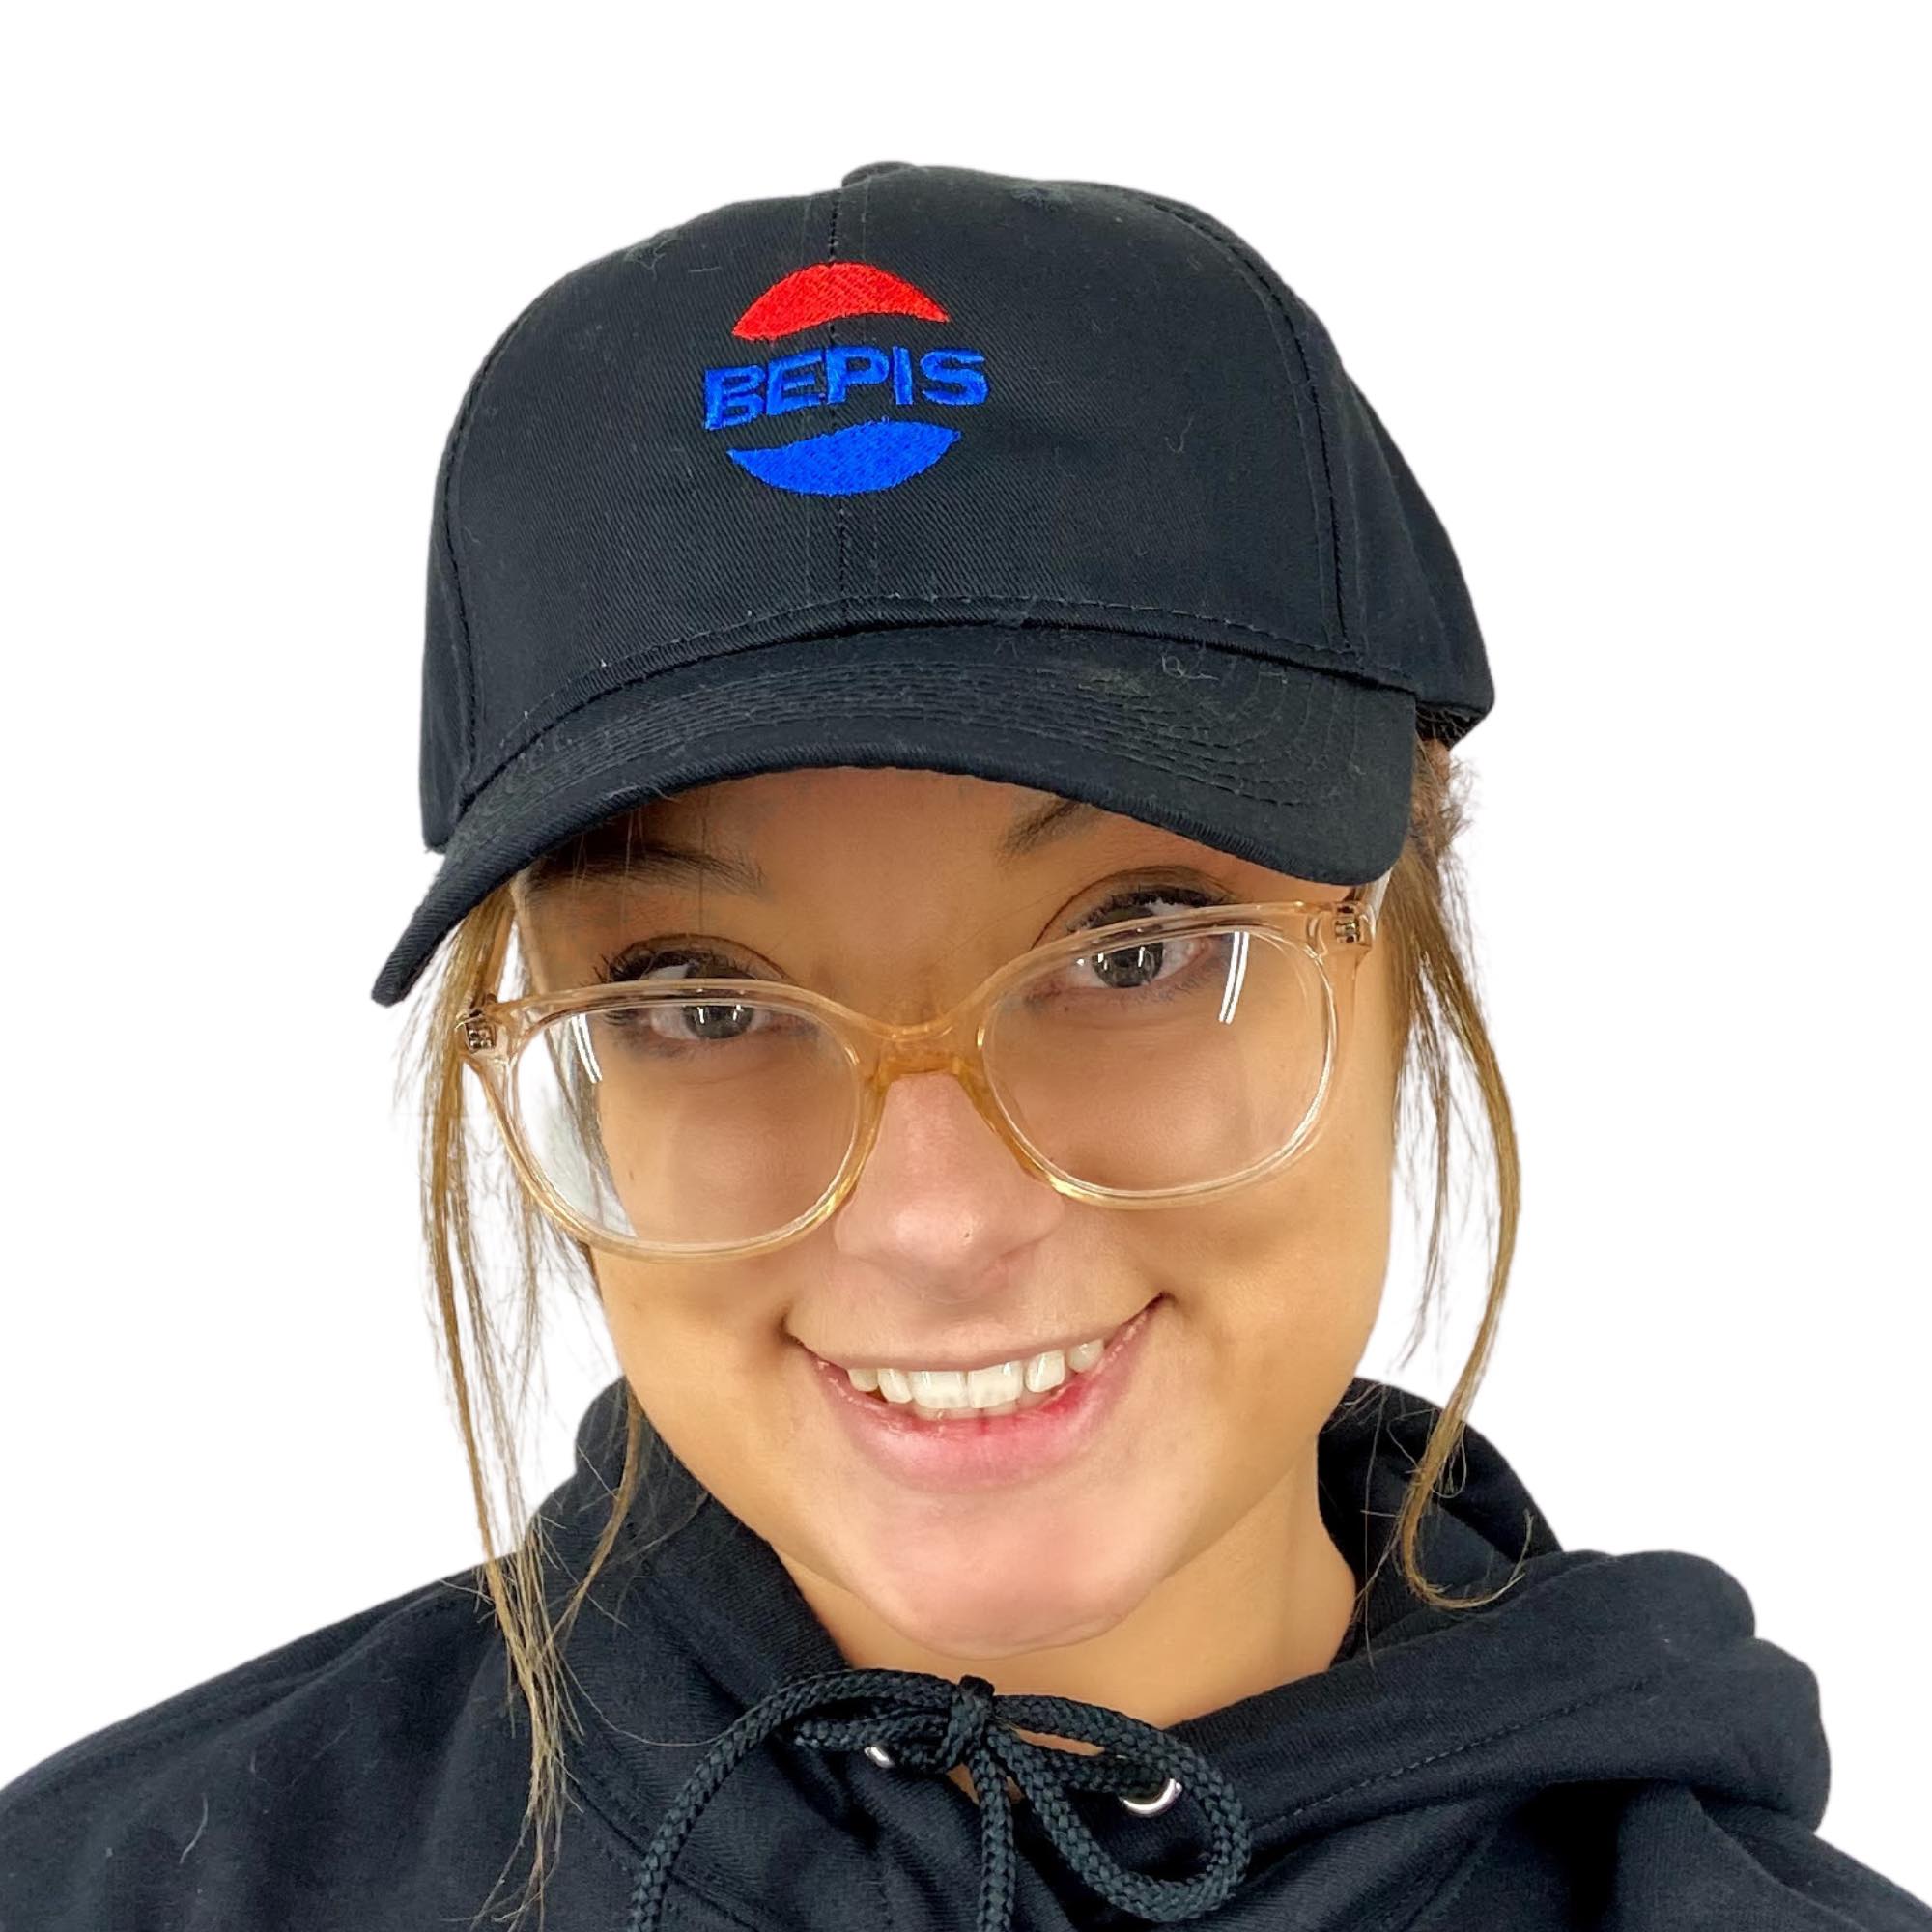 BEPIS Logo Embroidered Black Dad Hat, One Size Fits All